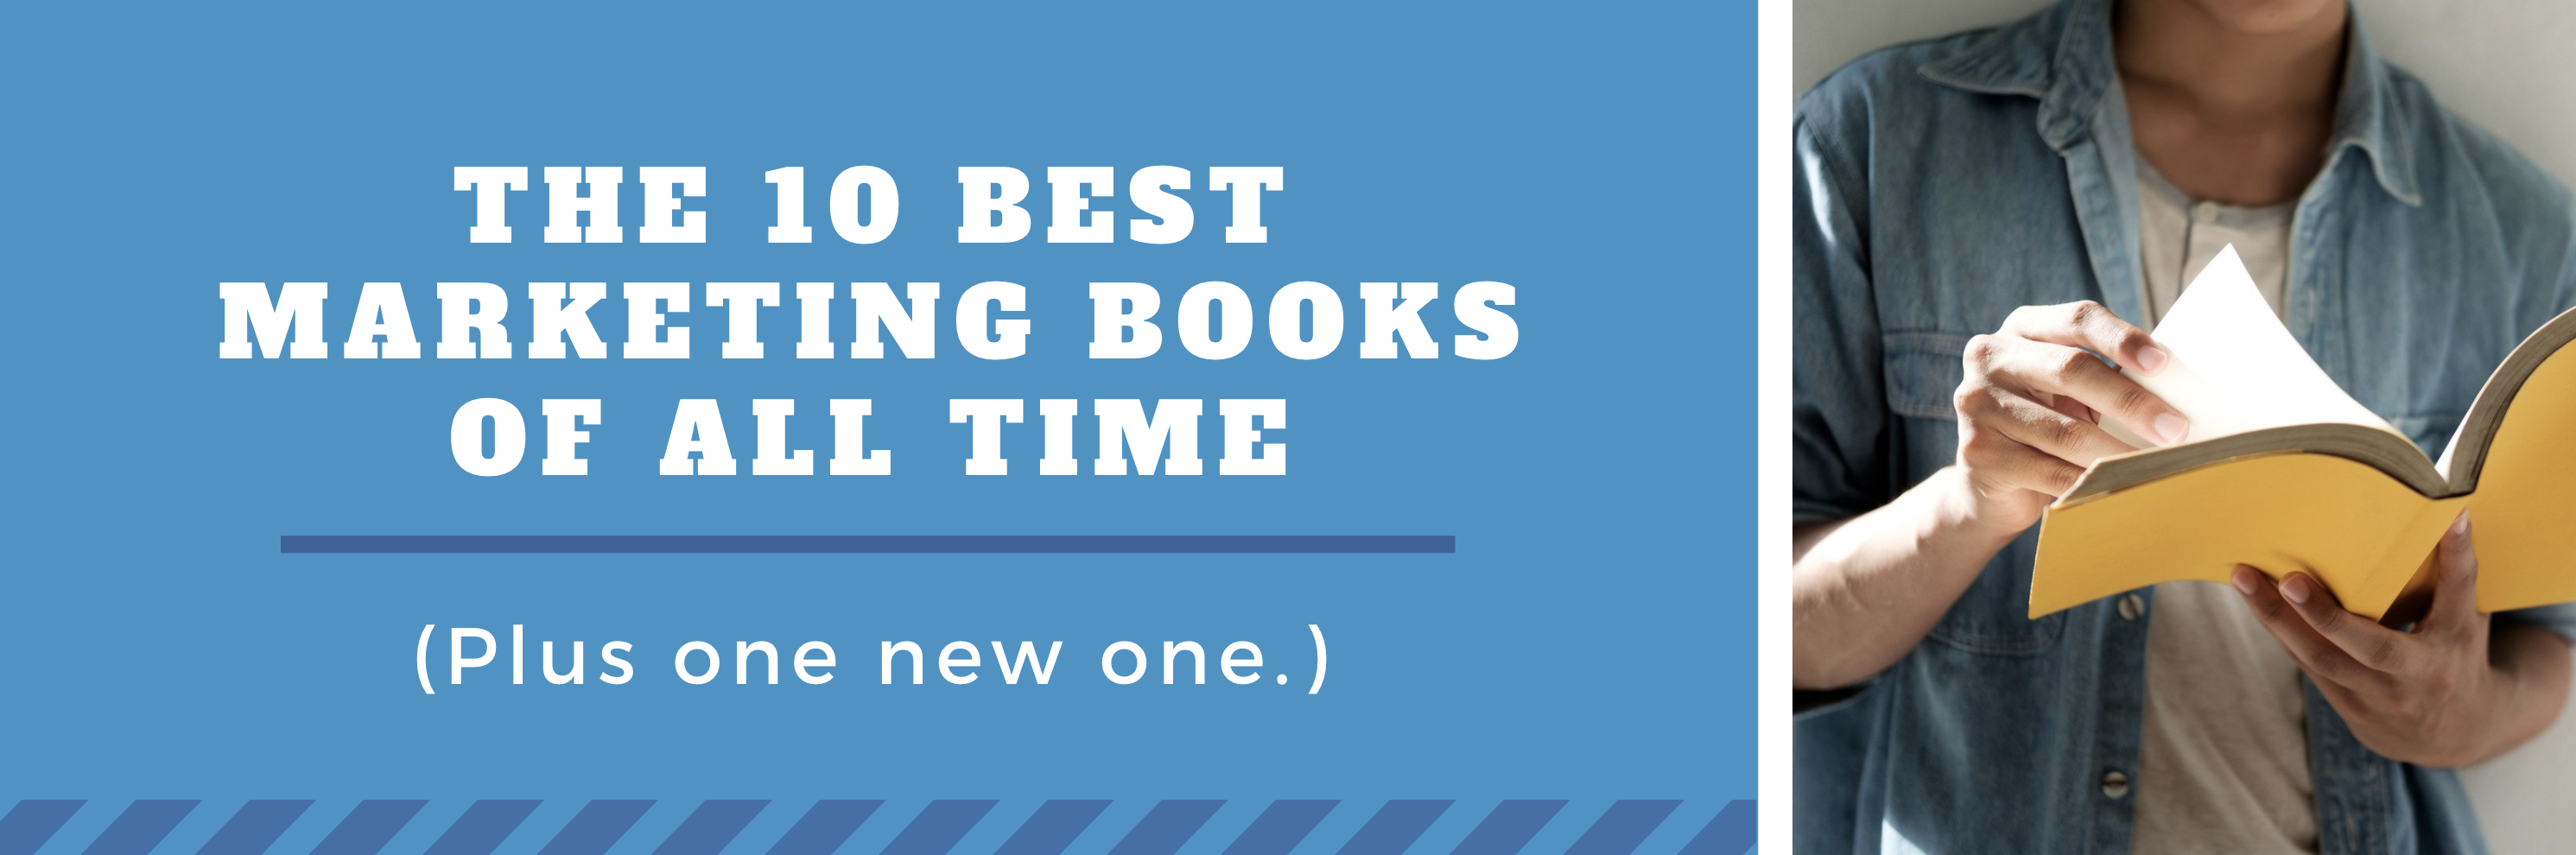 The 10 Best Marketing Books of All Time (Plus One New One)